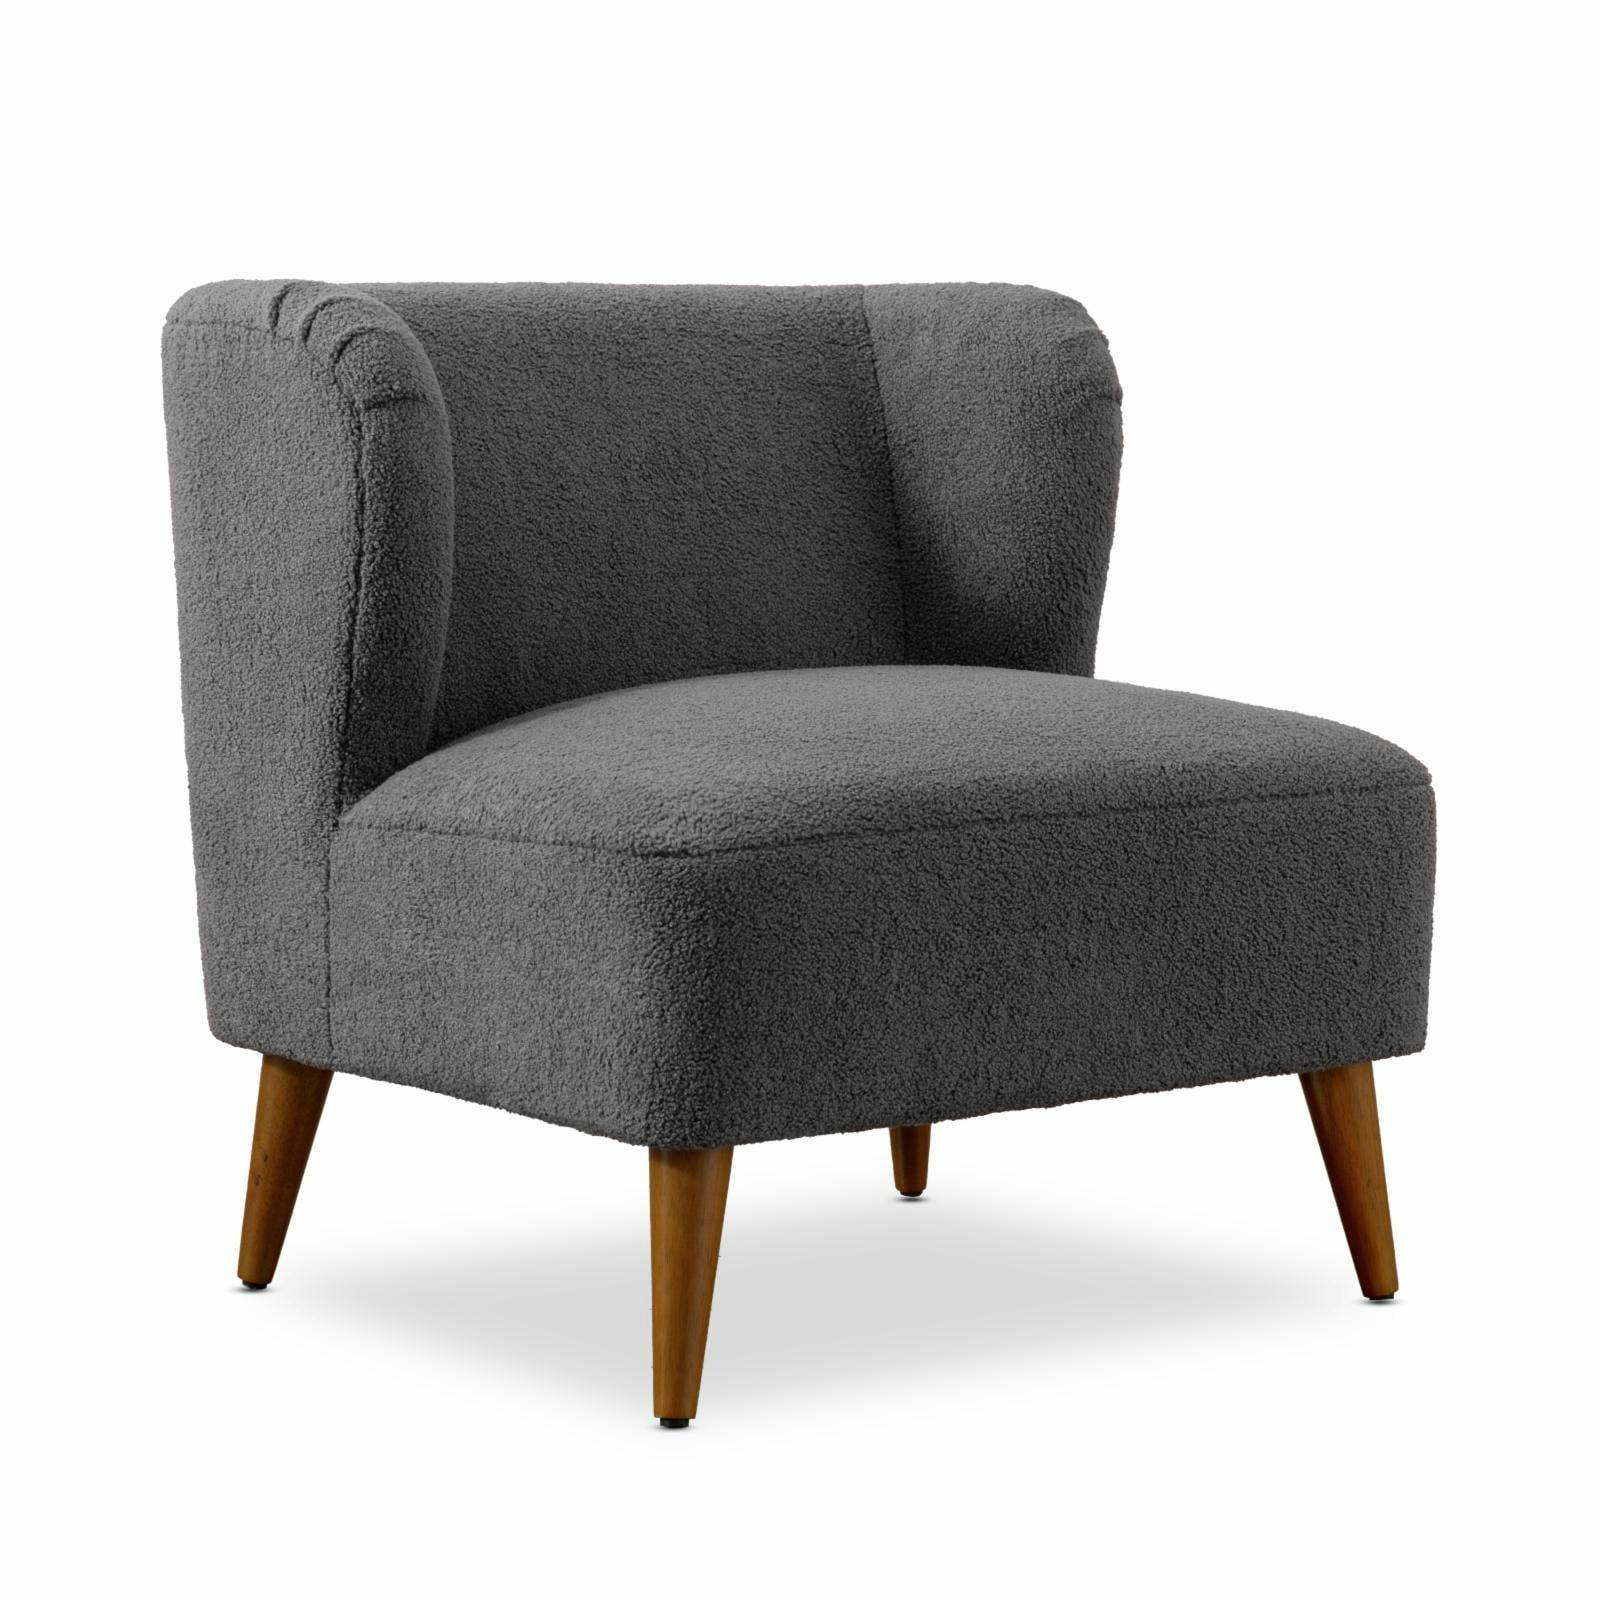 Vesper Gray Textured Boucle Transitional Armless Accent Chair